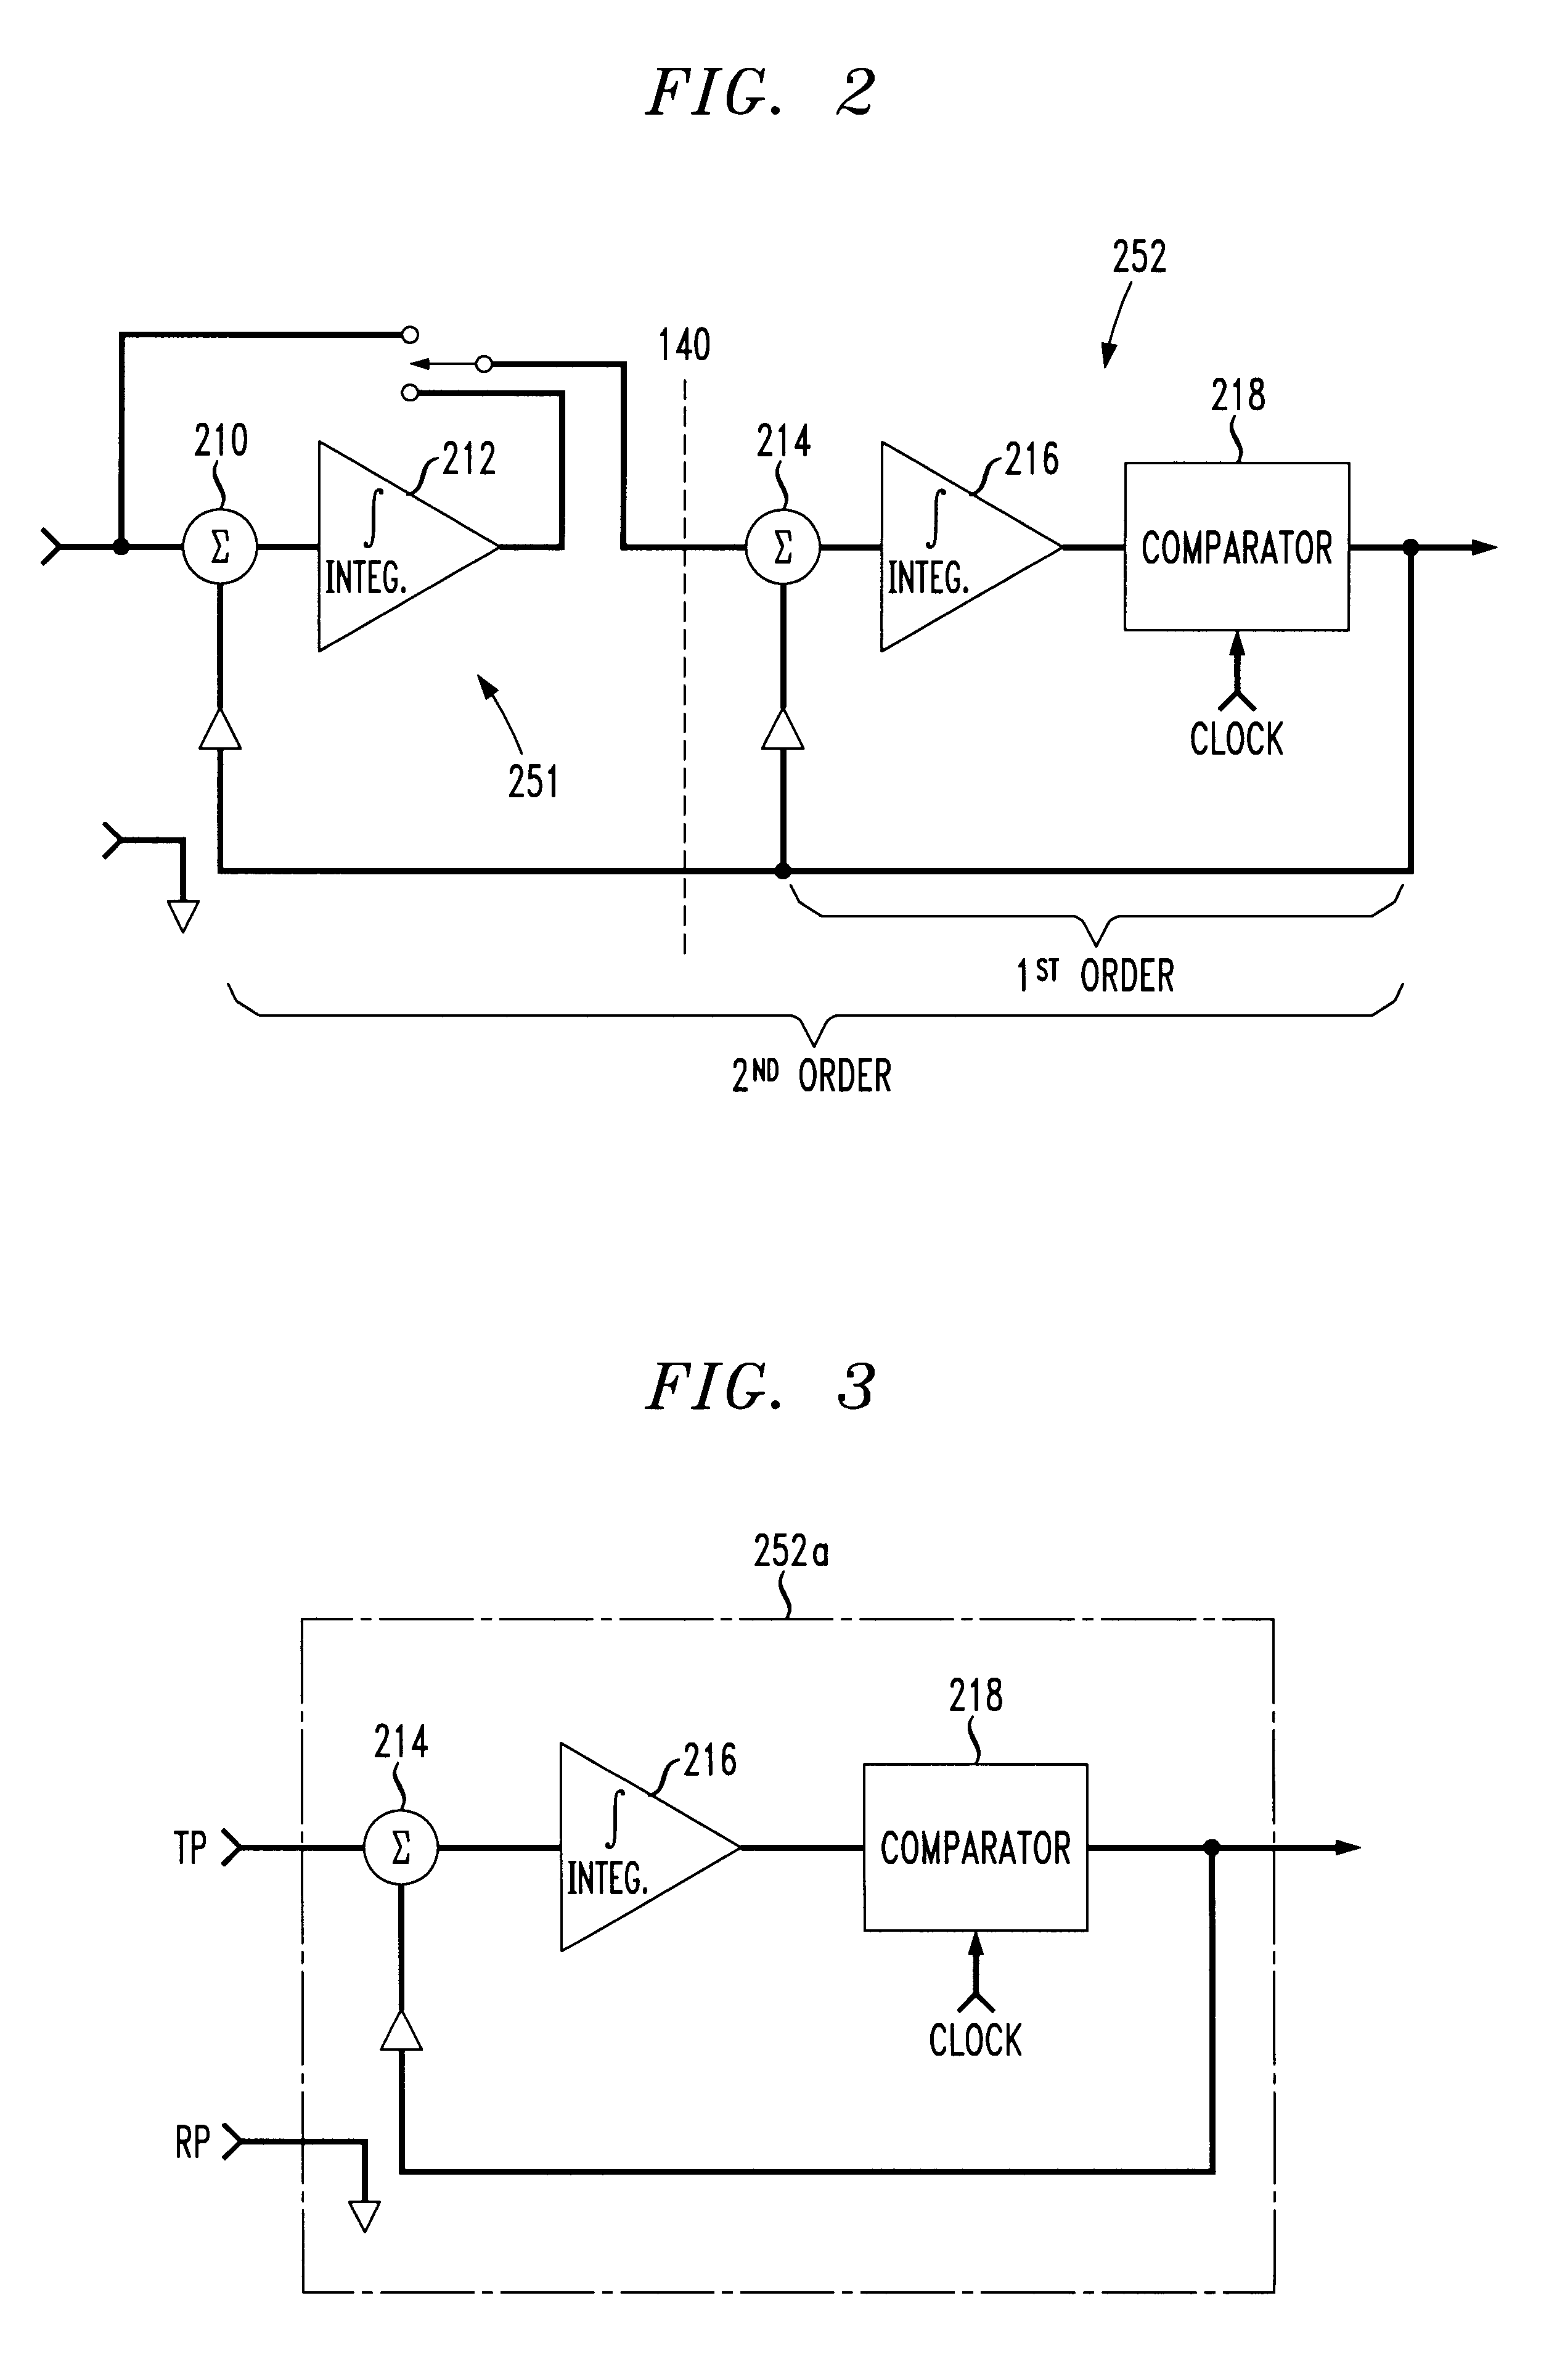 Call related information reception using sigma/delta modulation